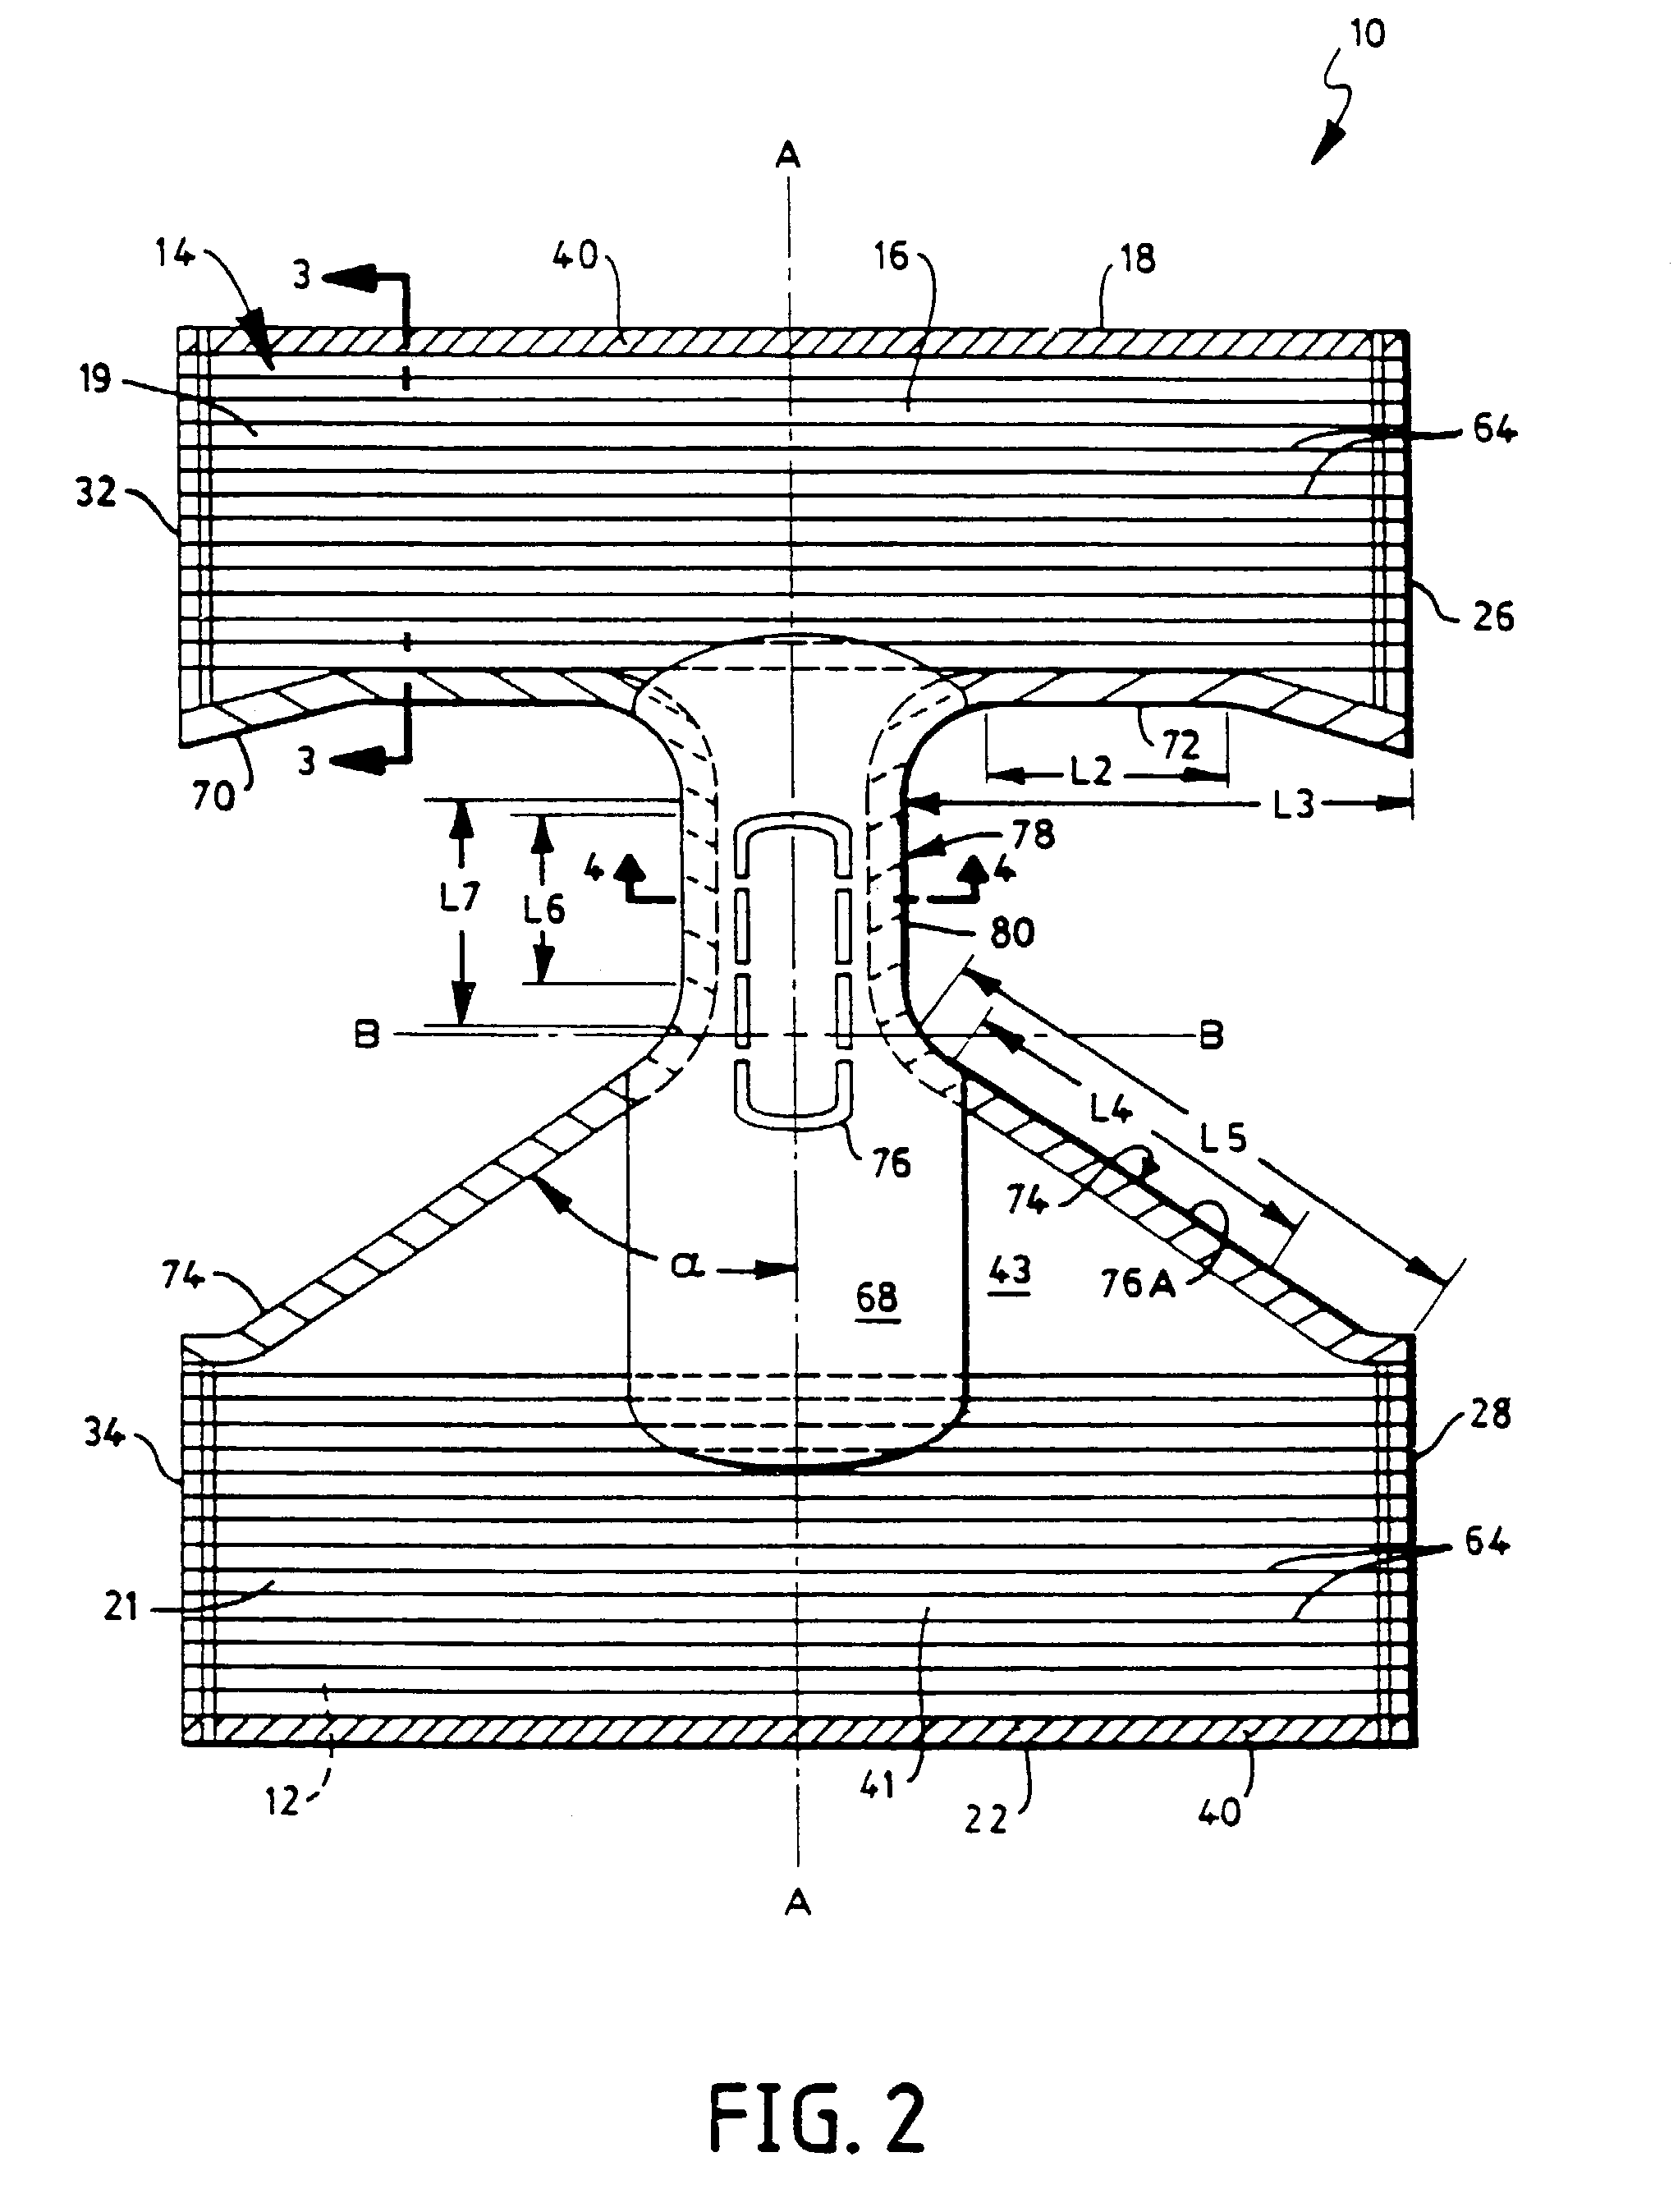 Disposable garment and related manufacturing equipment and methods